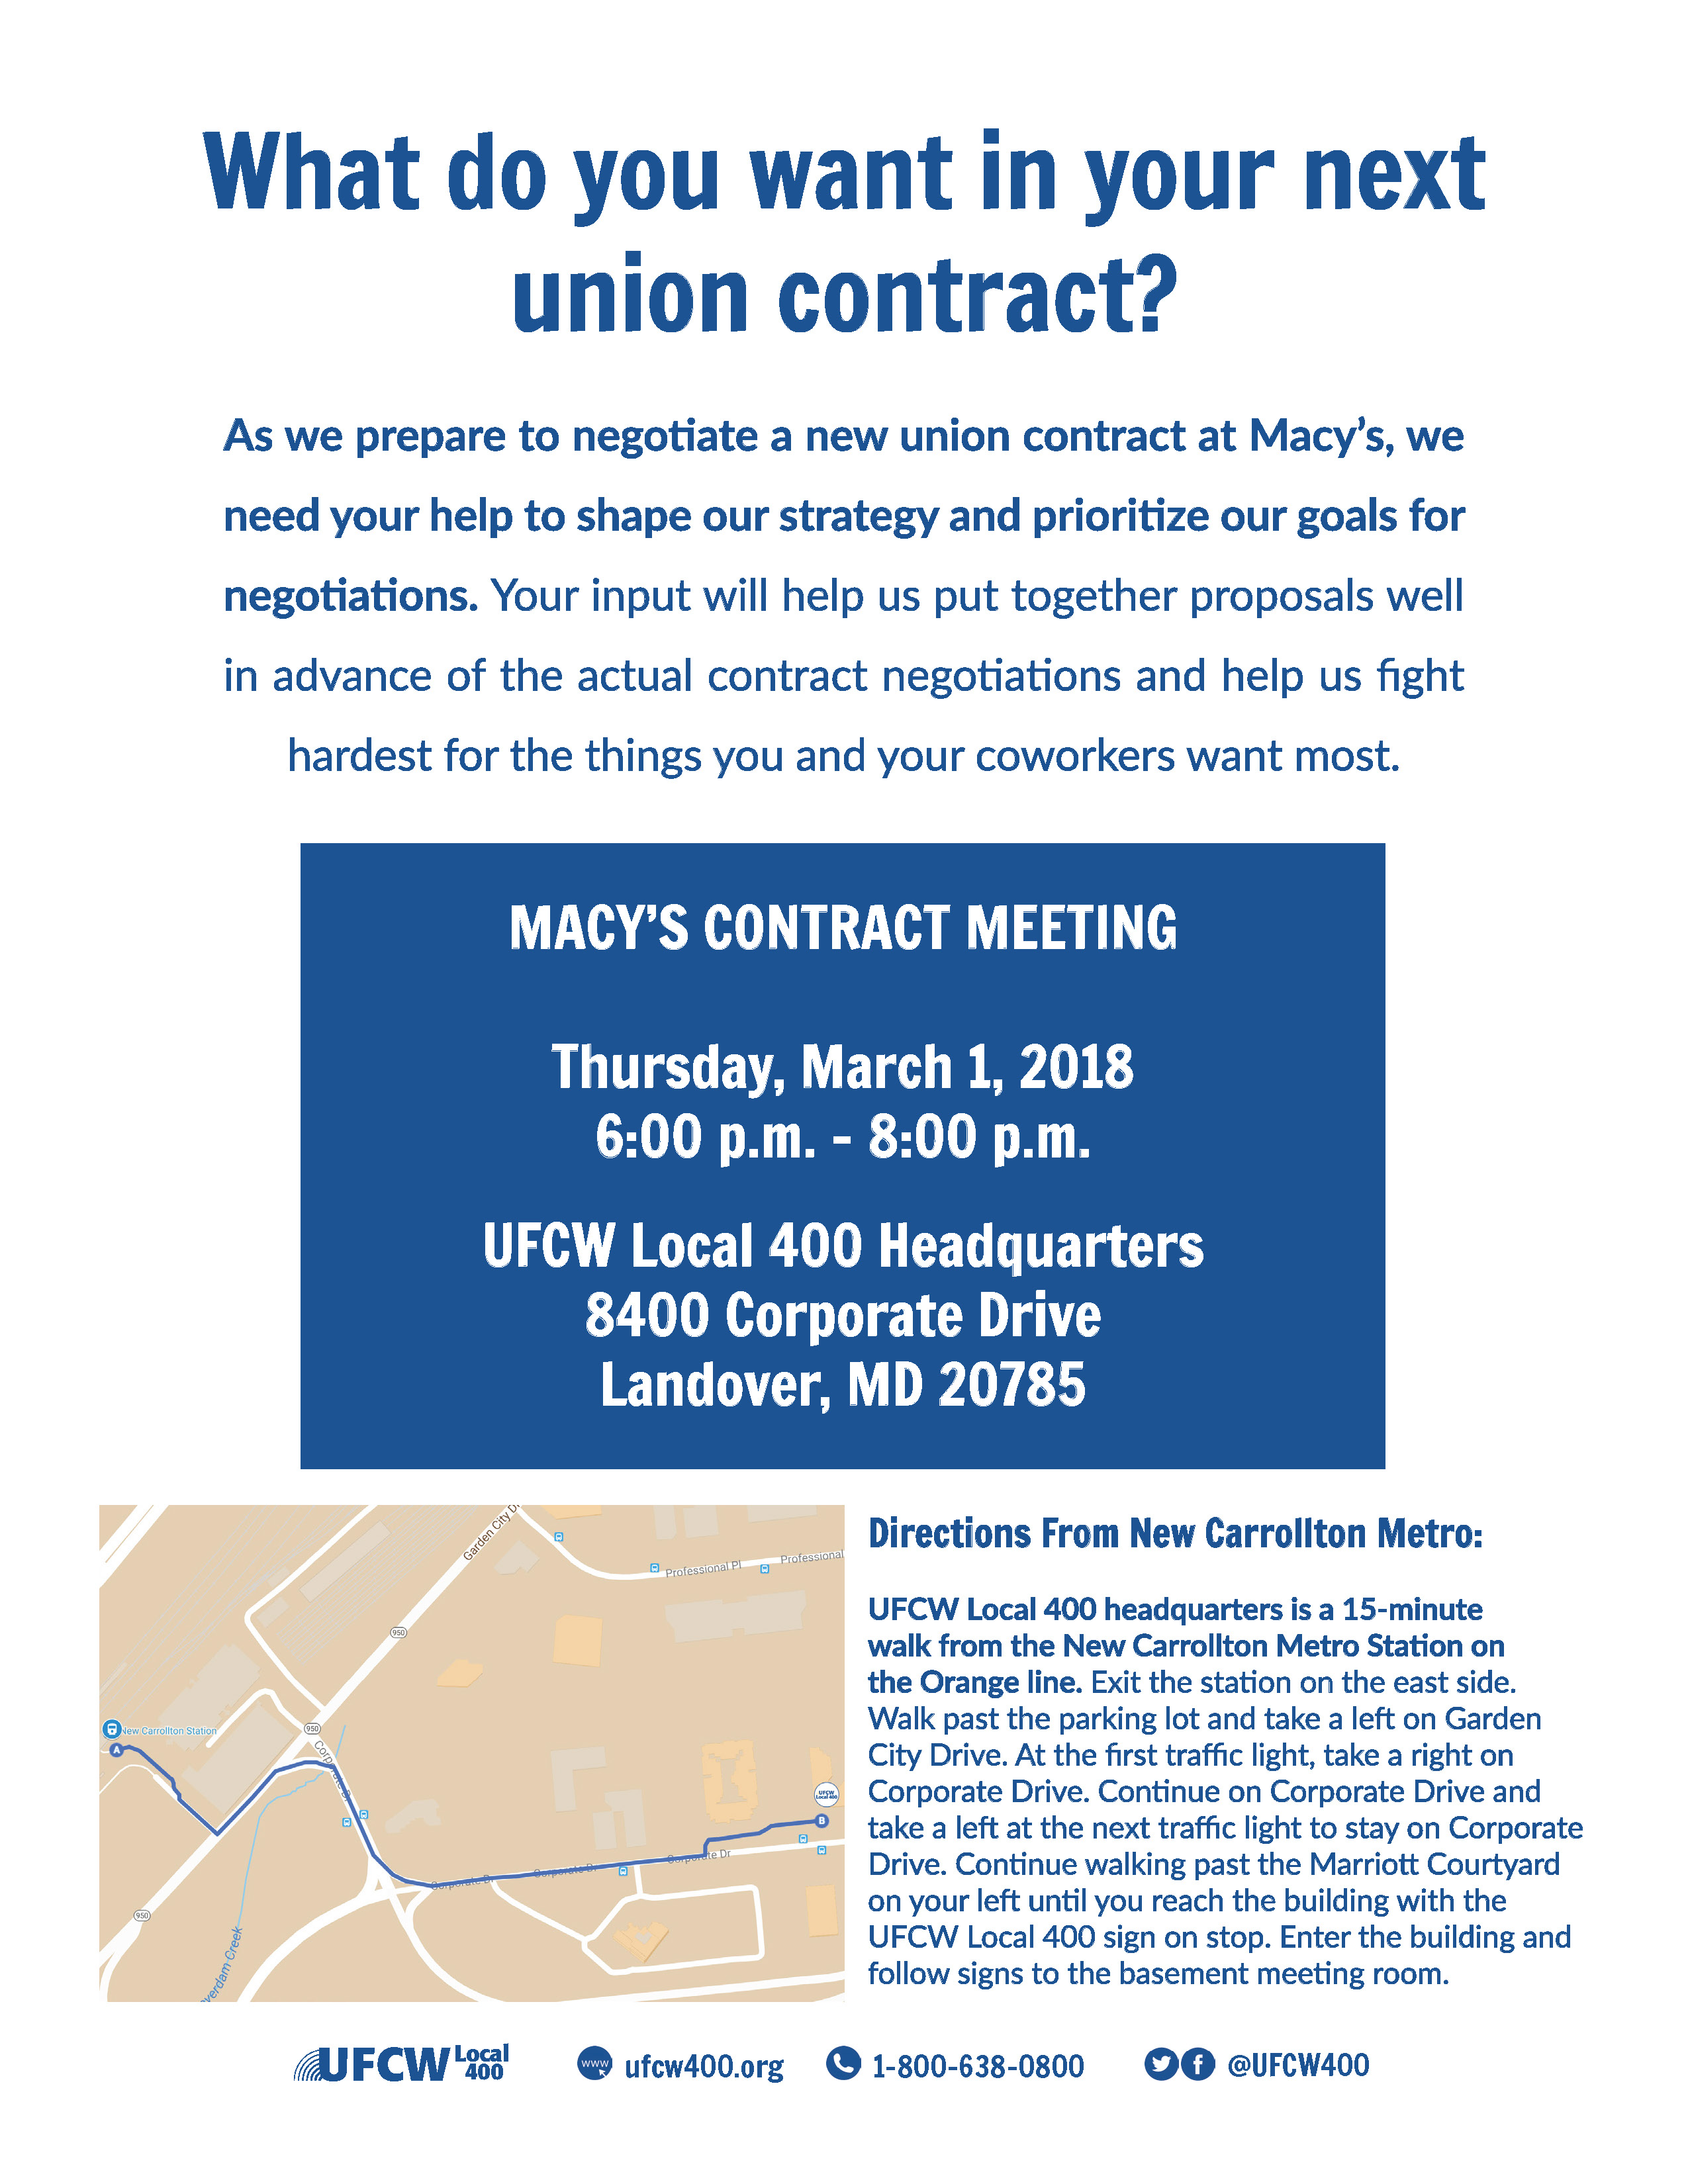 March 1st: Macy’s Union Contract Meeting